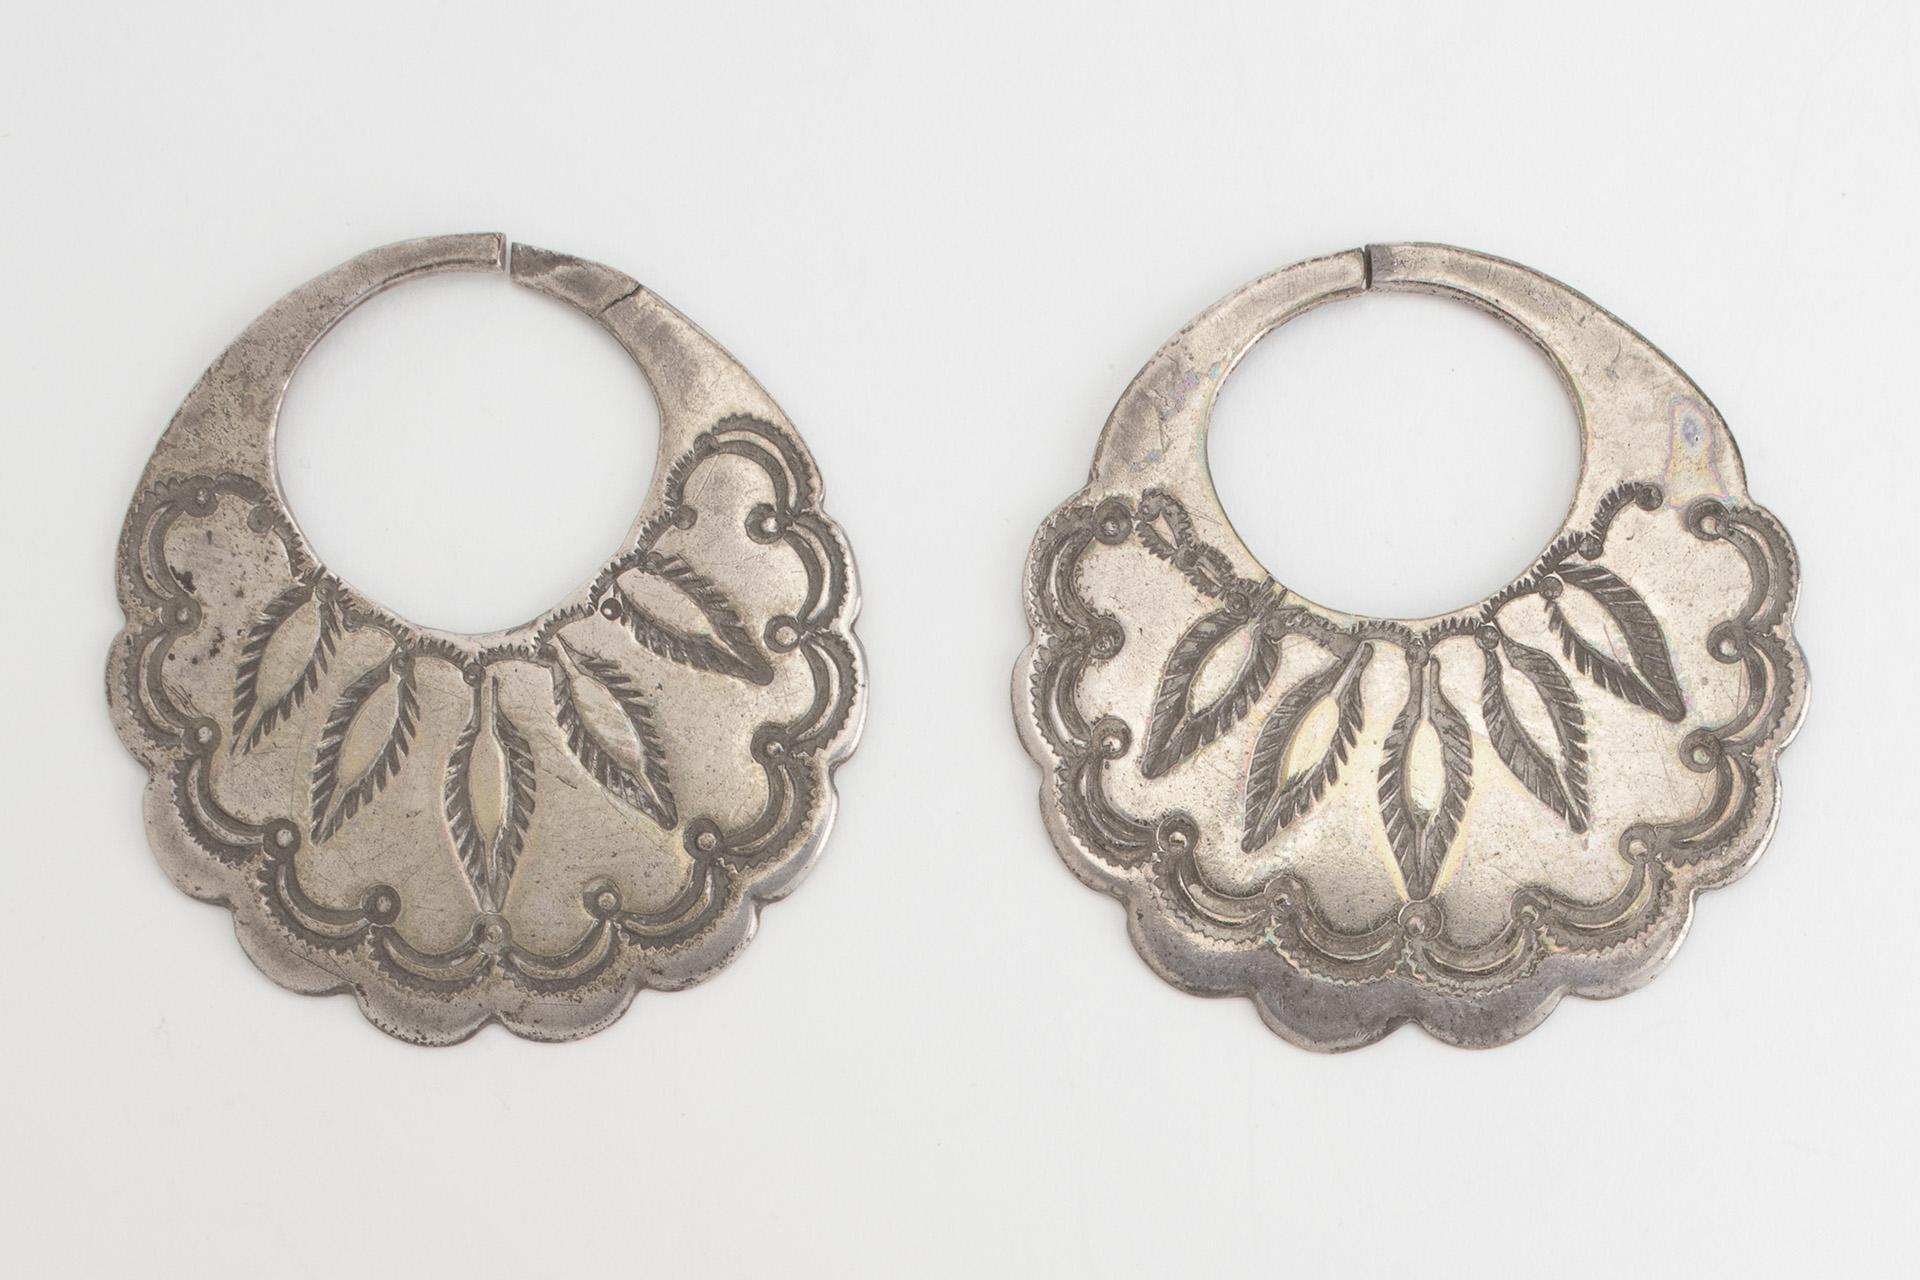 A pair of silver earrings with an ornate design on them.